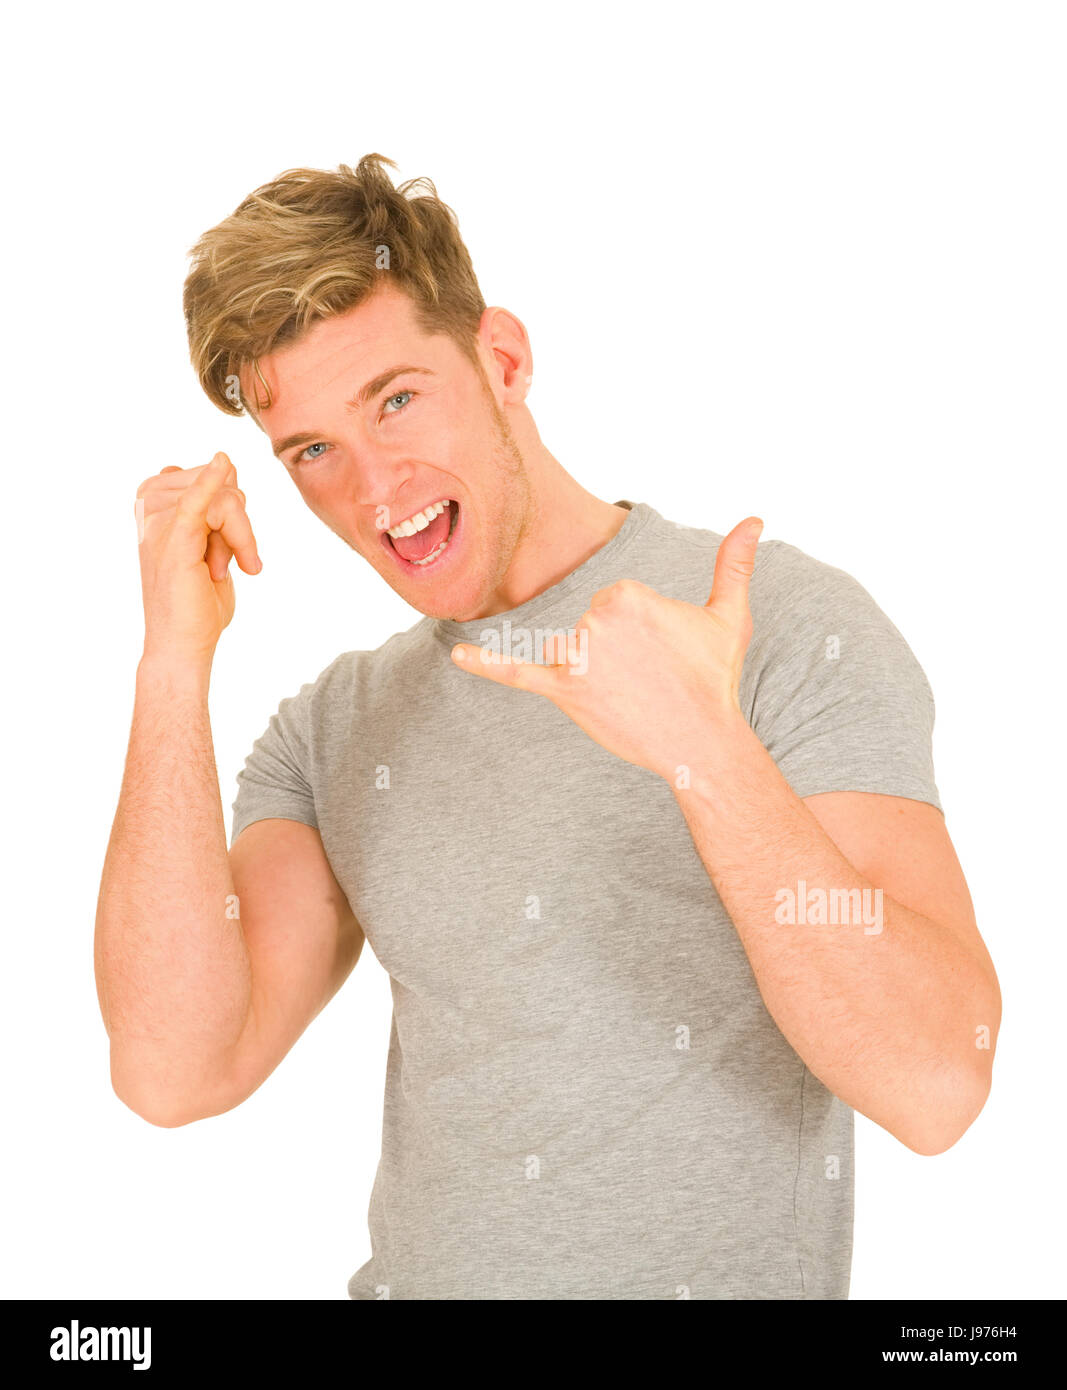 gesture, laugh, laughs, laughing, twit, giggle, smile, smiling, laughter, Stock Photo